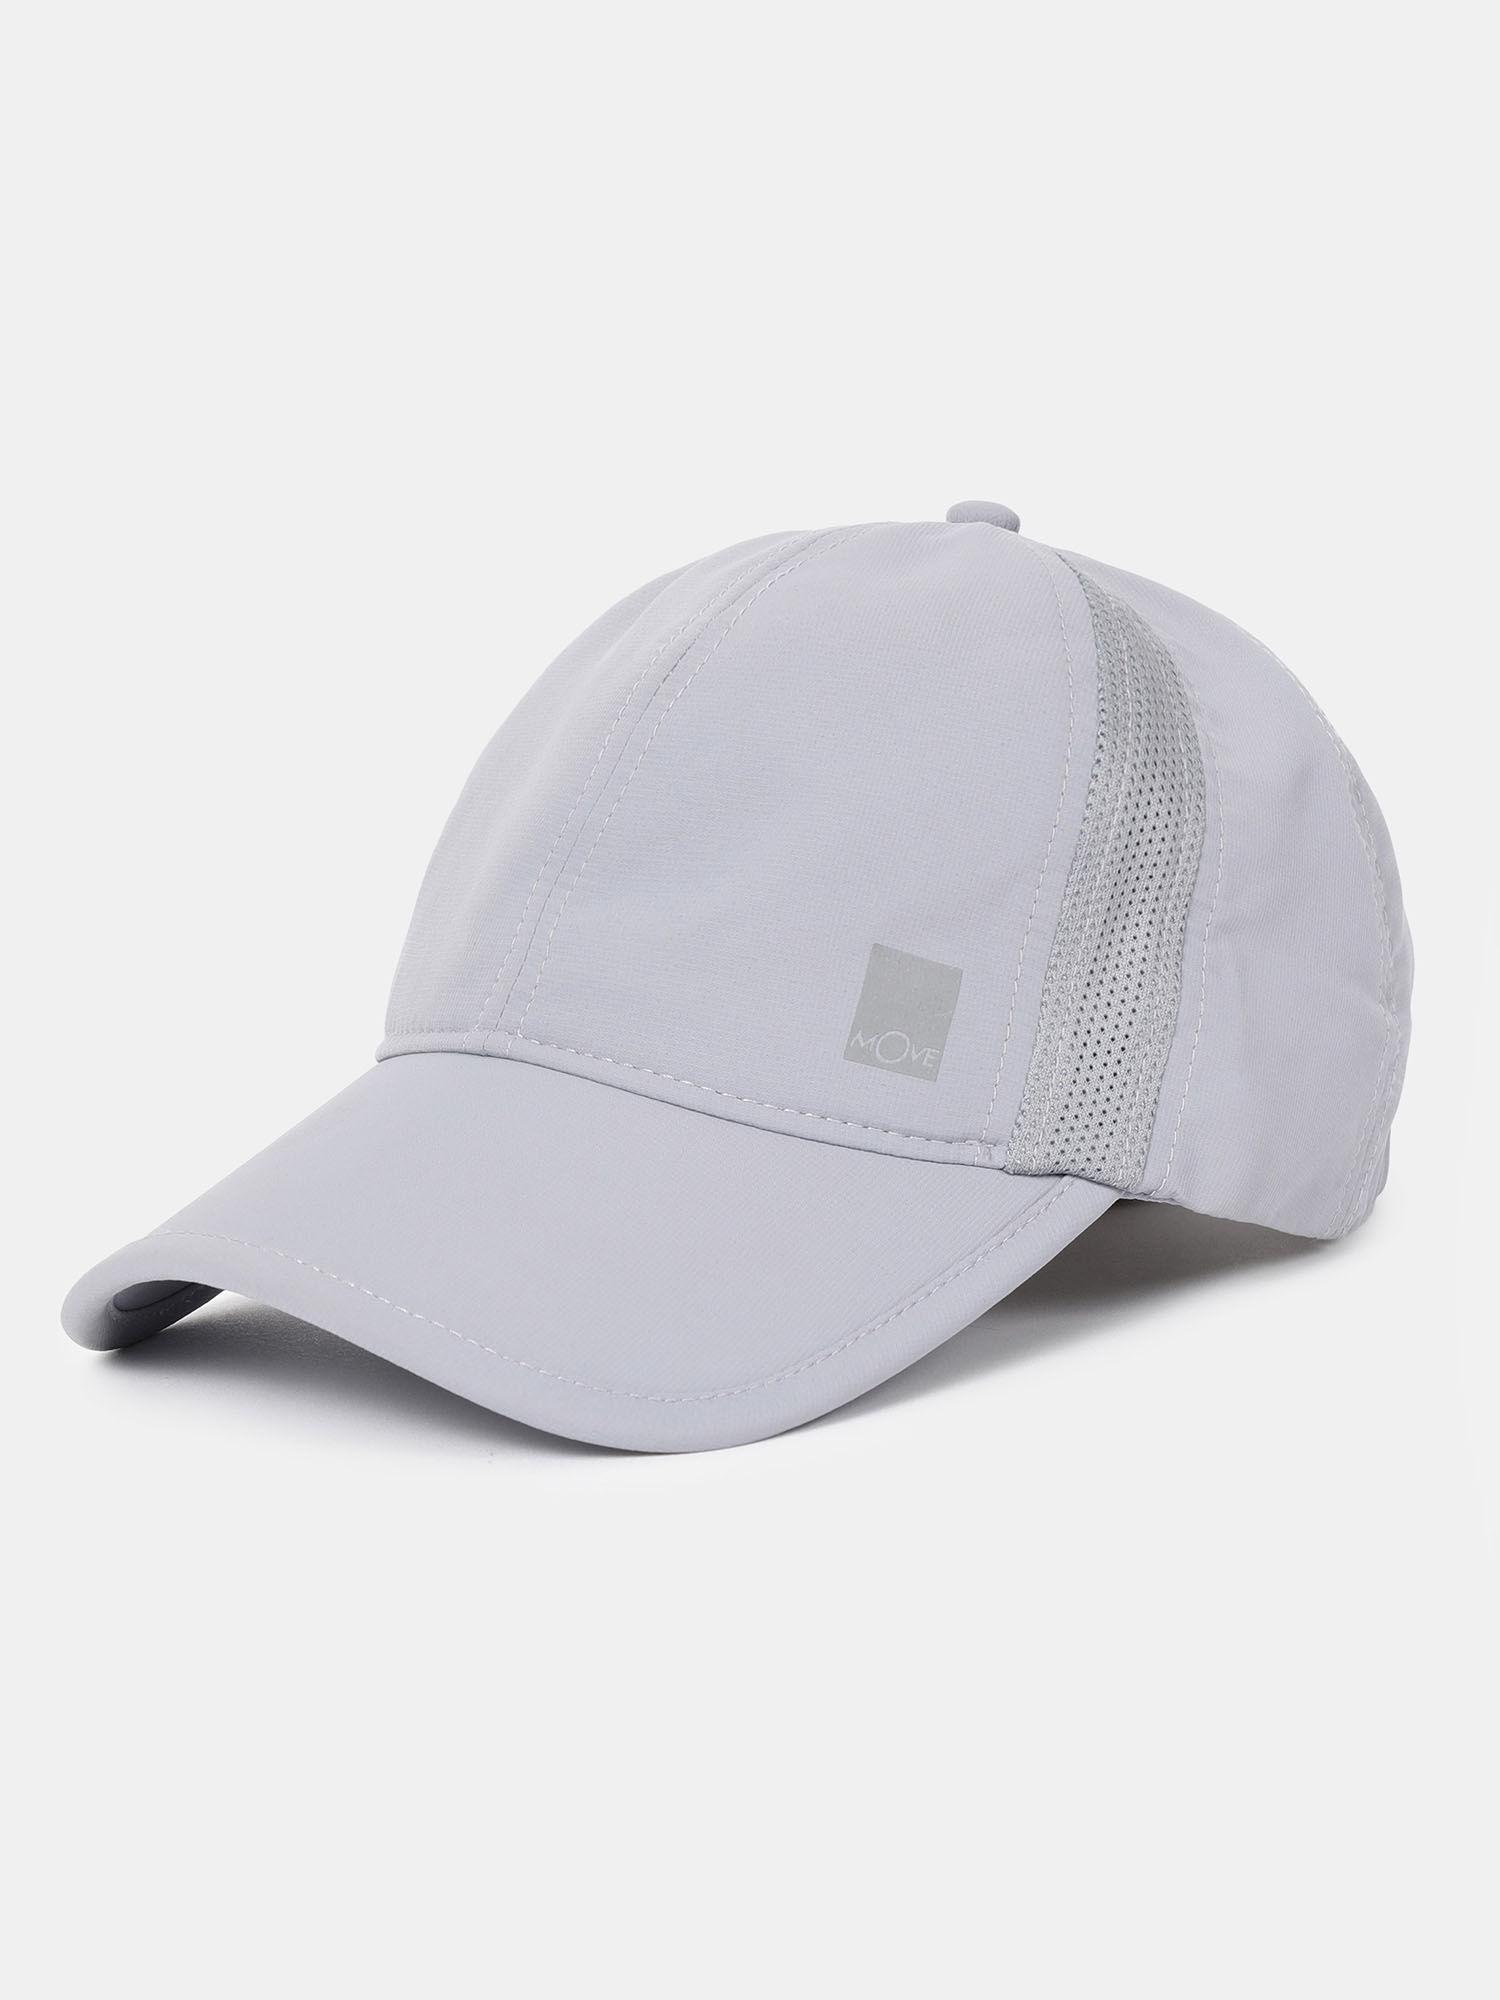 cp21-polyester-solid-cap-with-adjustable-back-closure-and-stay-dry-light-grey